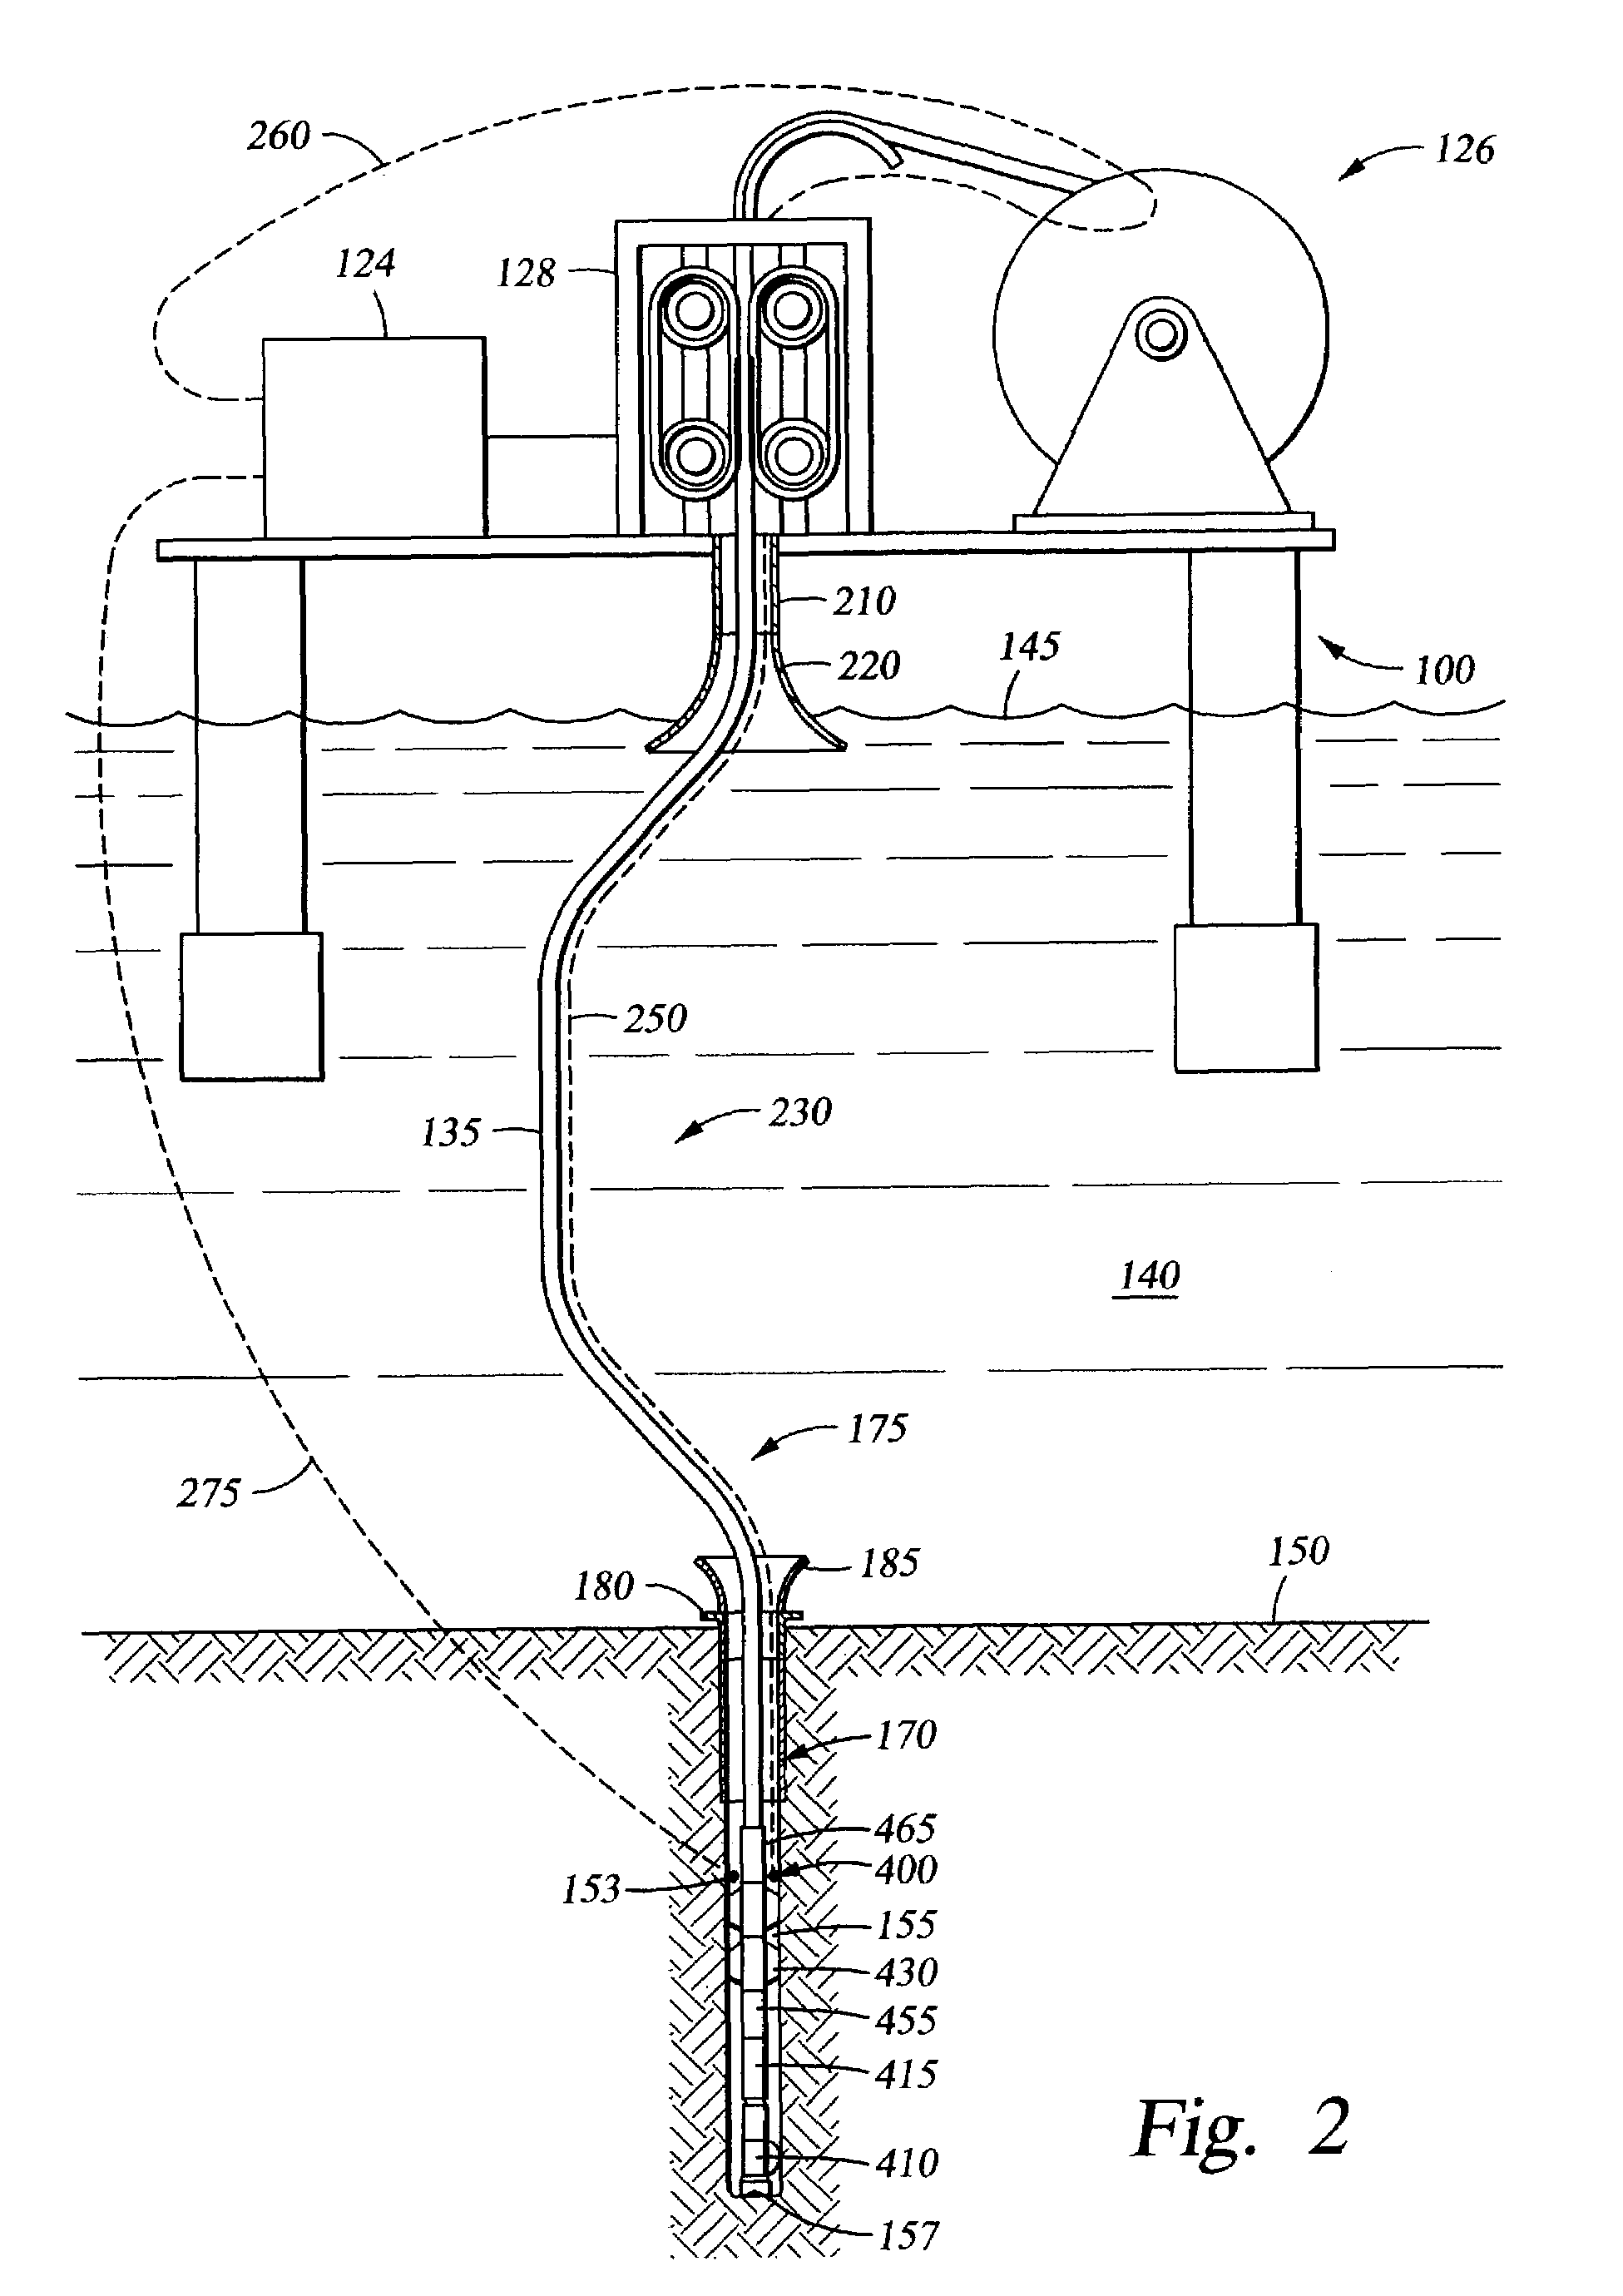 Method and apparatus for riserless drilling